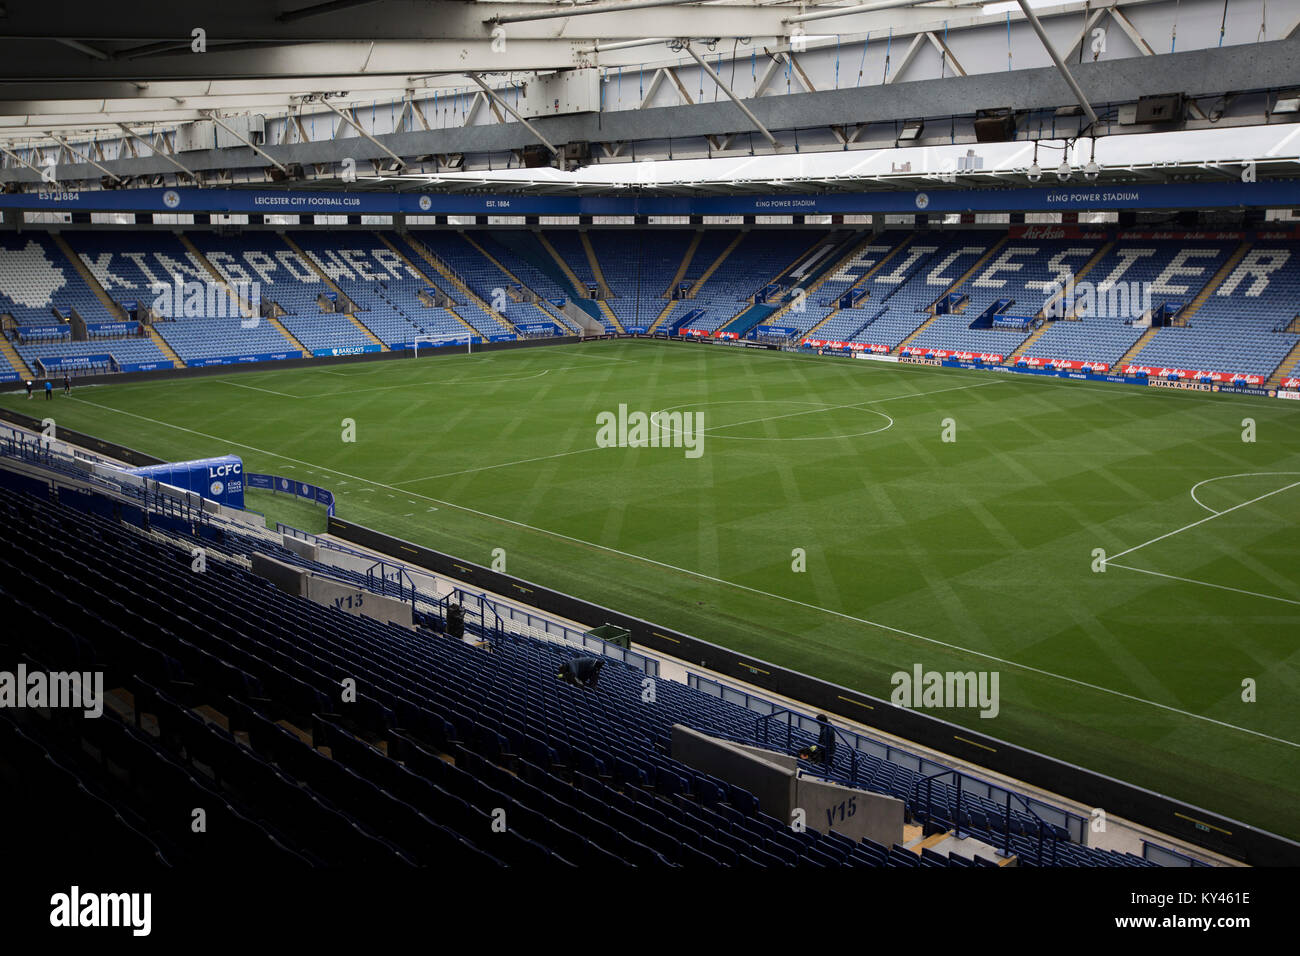 Leicester City football club's King Power stadium. Leicester City were on the brink of being surprise winners of the English Premier League in the 2015-16 season. Stock Photo